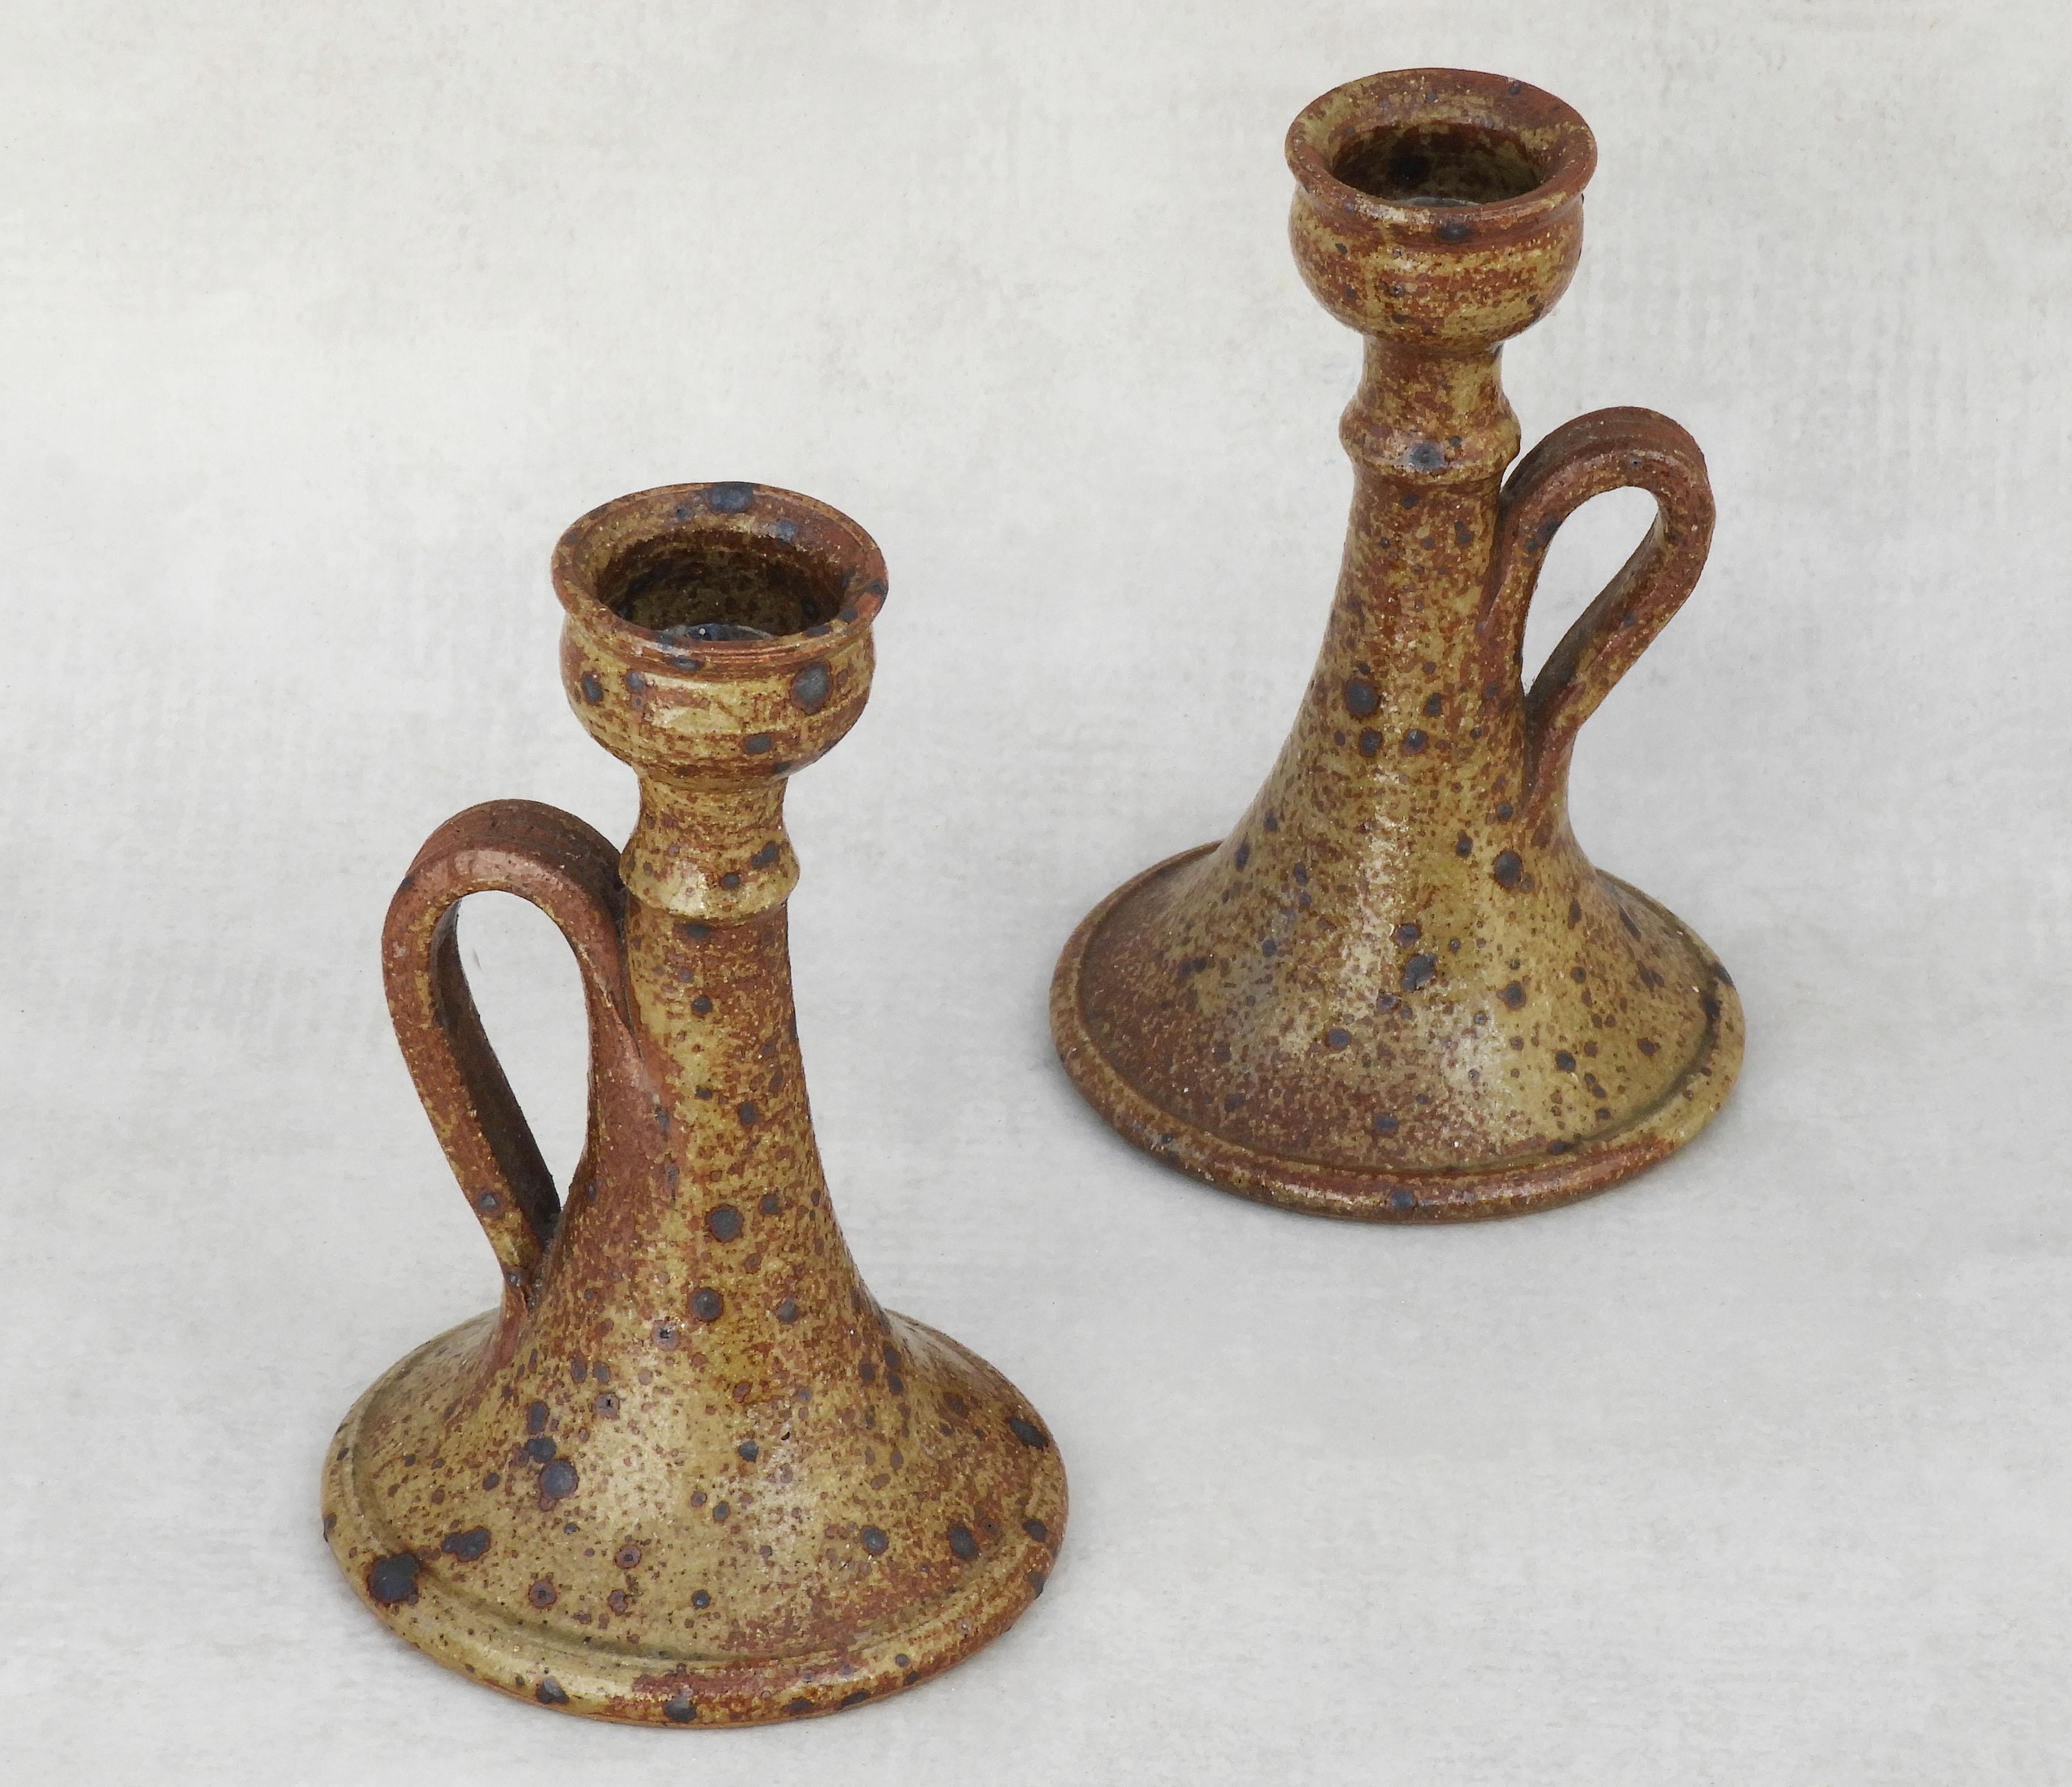 Organic Ironstone Candle Holders 1960s French Studio Pottery  In Good Condition For Sale In Trensacq, FR